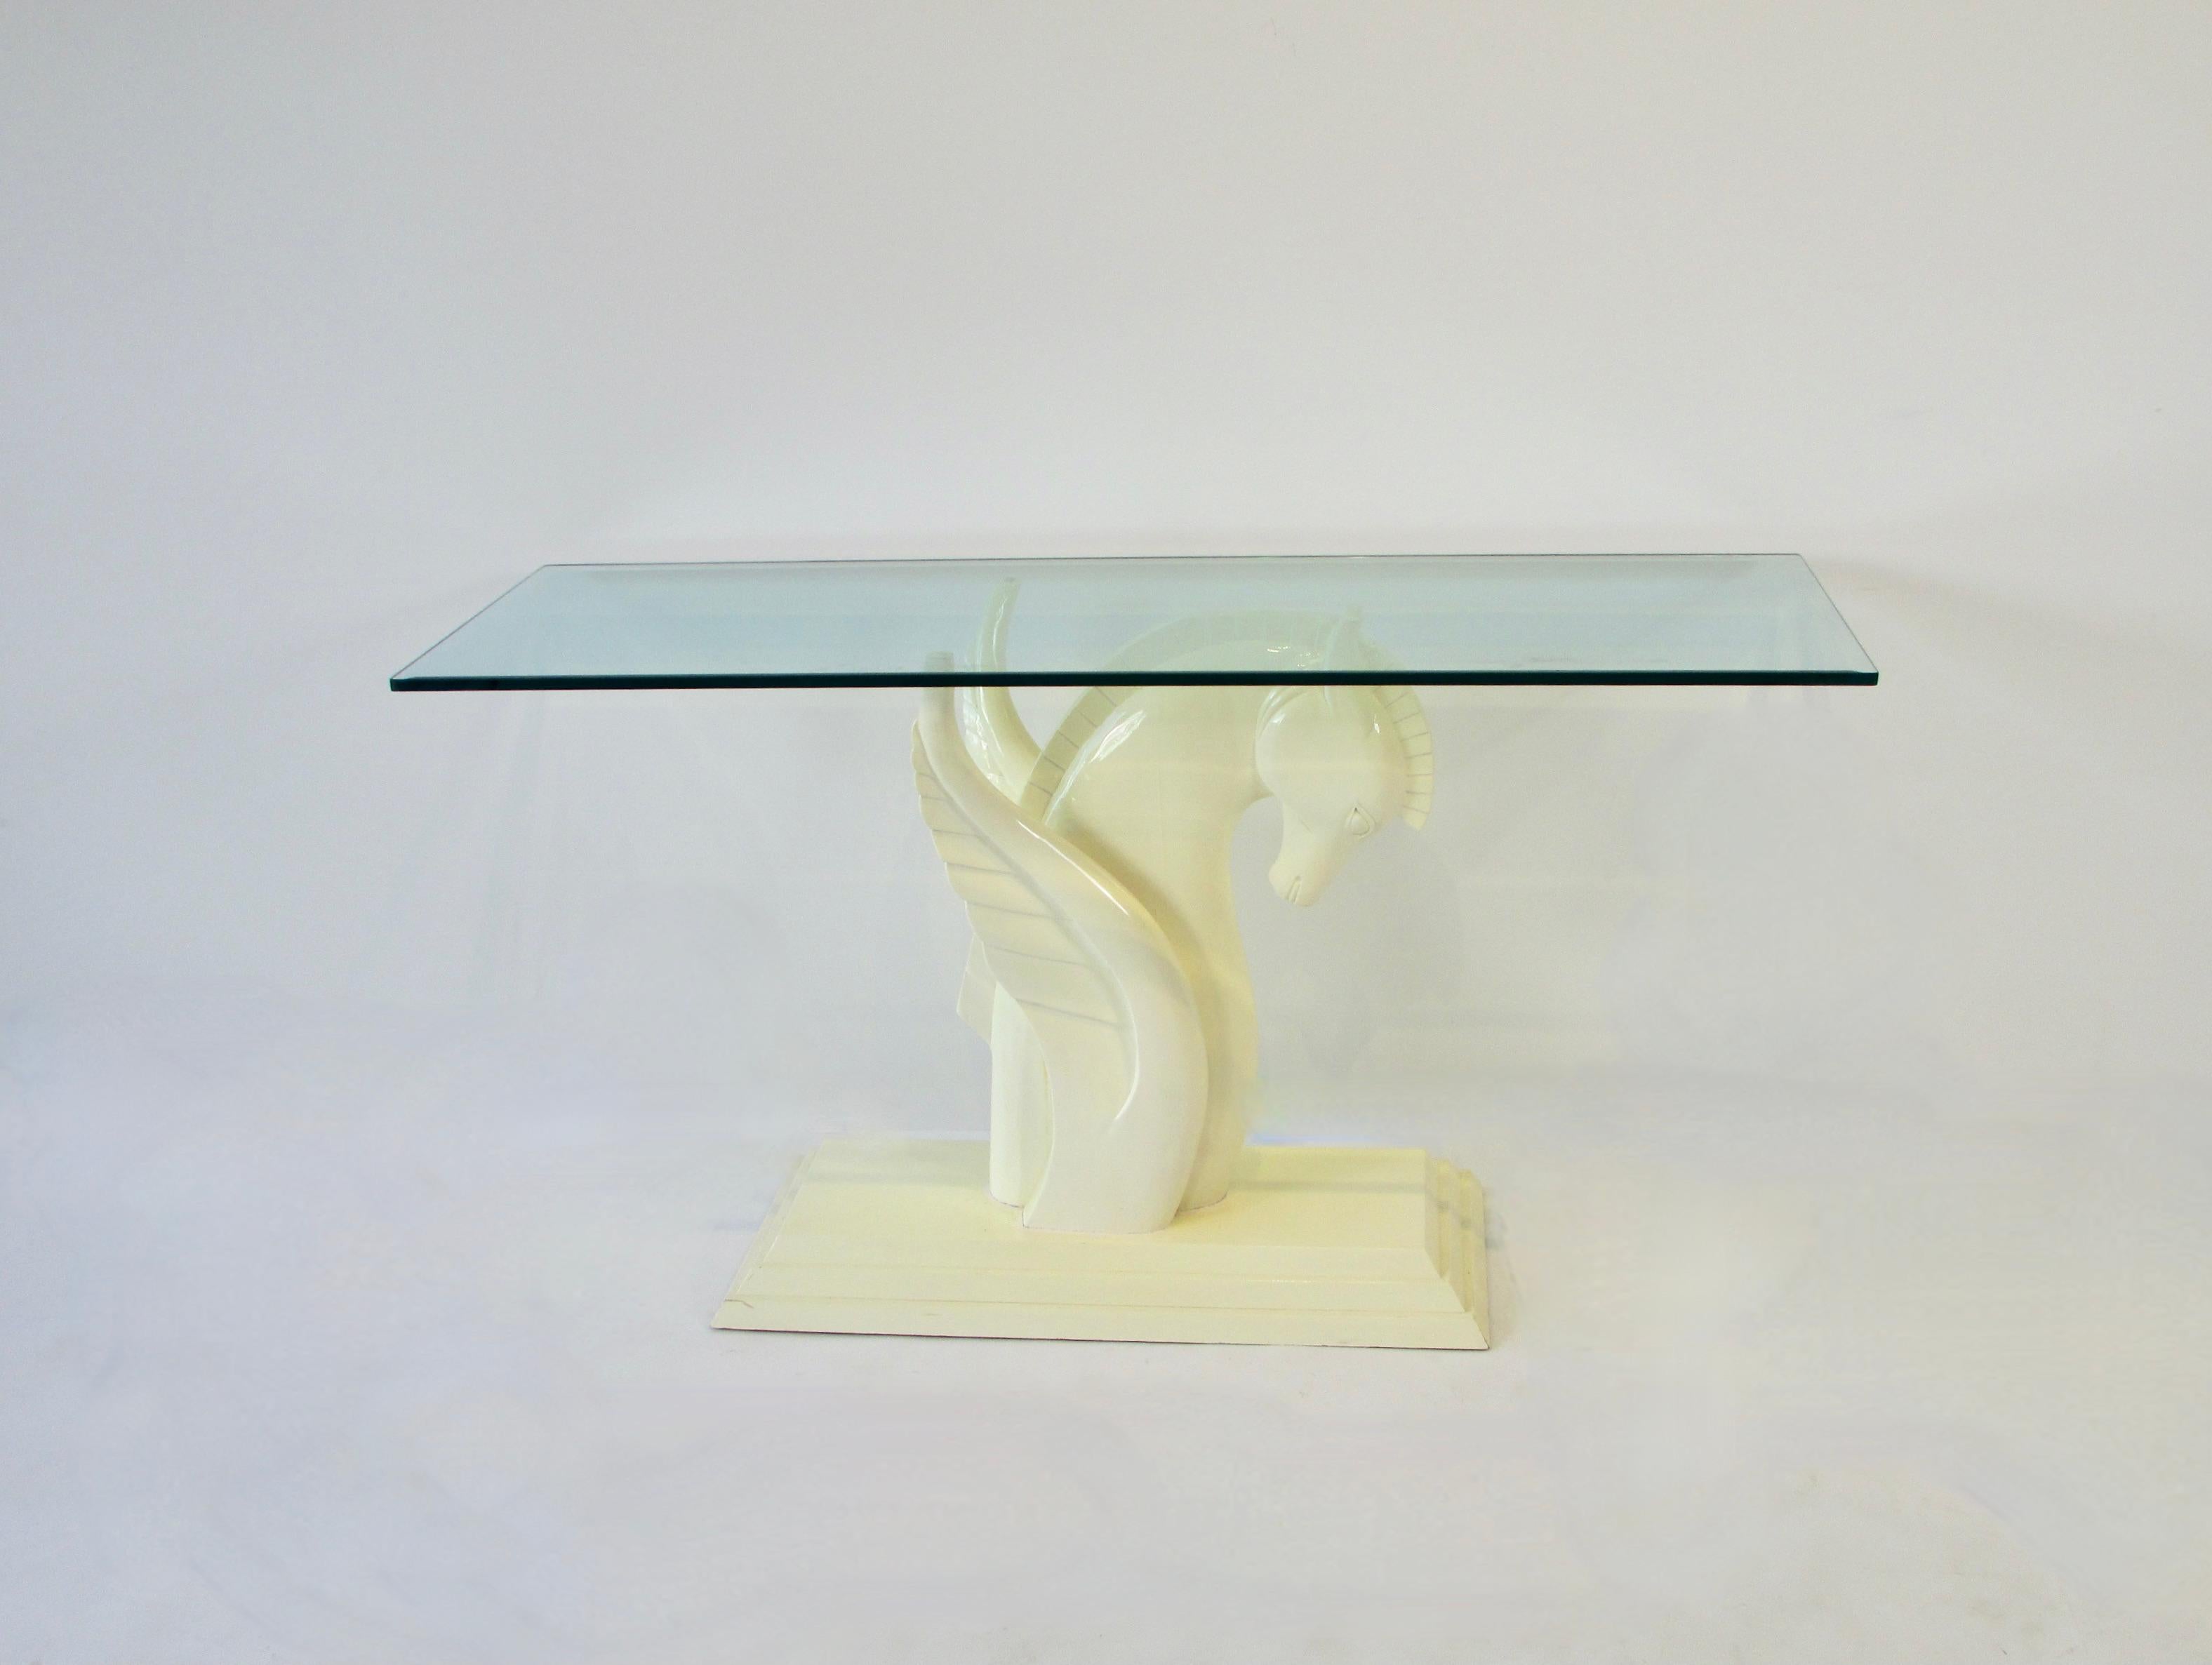 In trying to bring back the opulence of the Art Deco era designers such as Karl Marx introduced pieces like this Winged Pegasus lacquered console table. The Retro Deco console is very much in his style. Console base measures 14 deep by 32 wide at 28